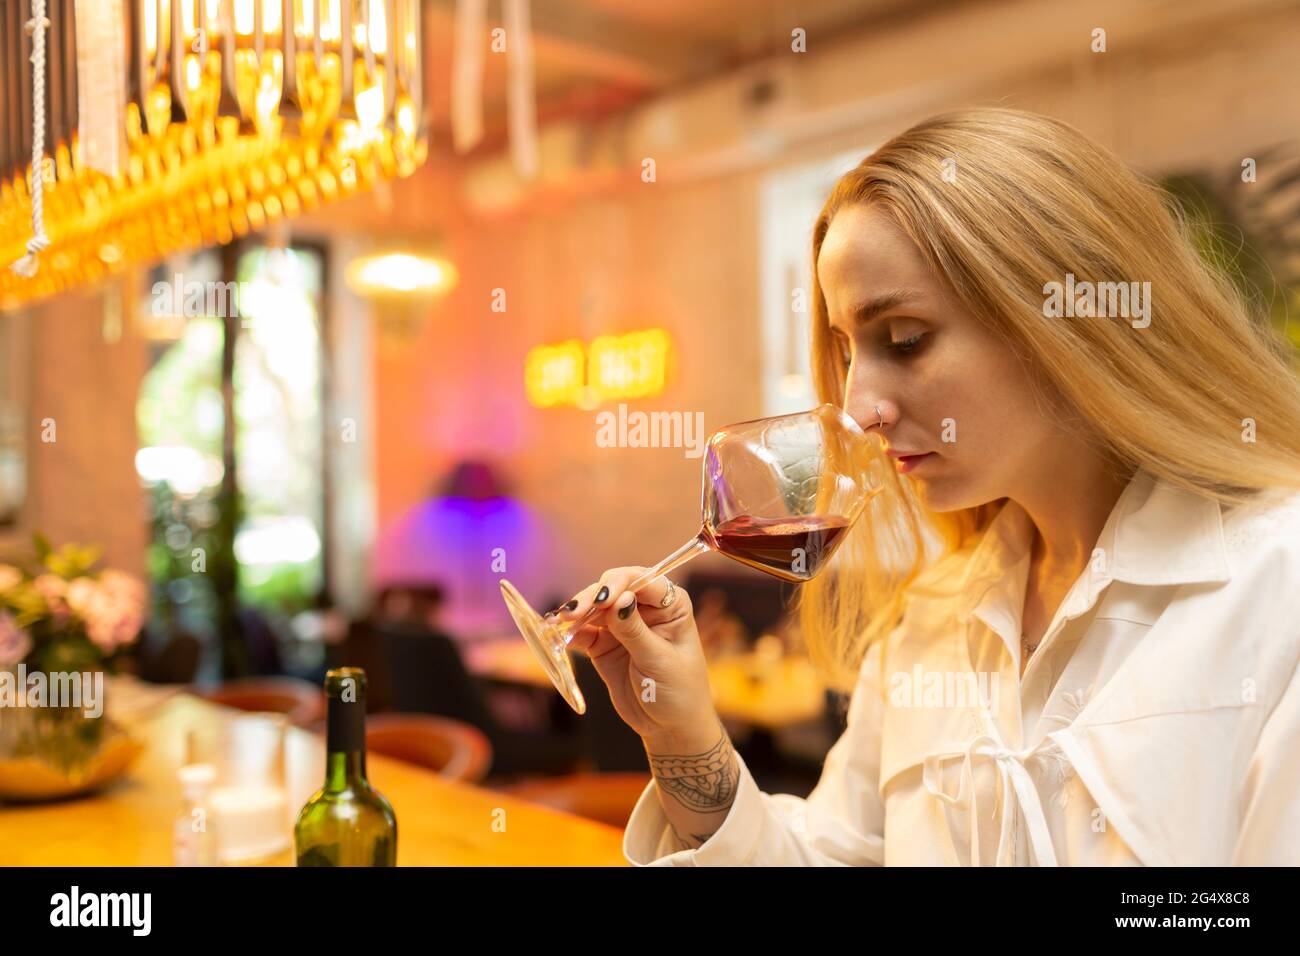 Young blond woman drinking red wine while sitting at bar Stock Photo